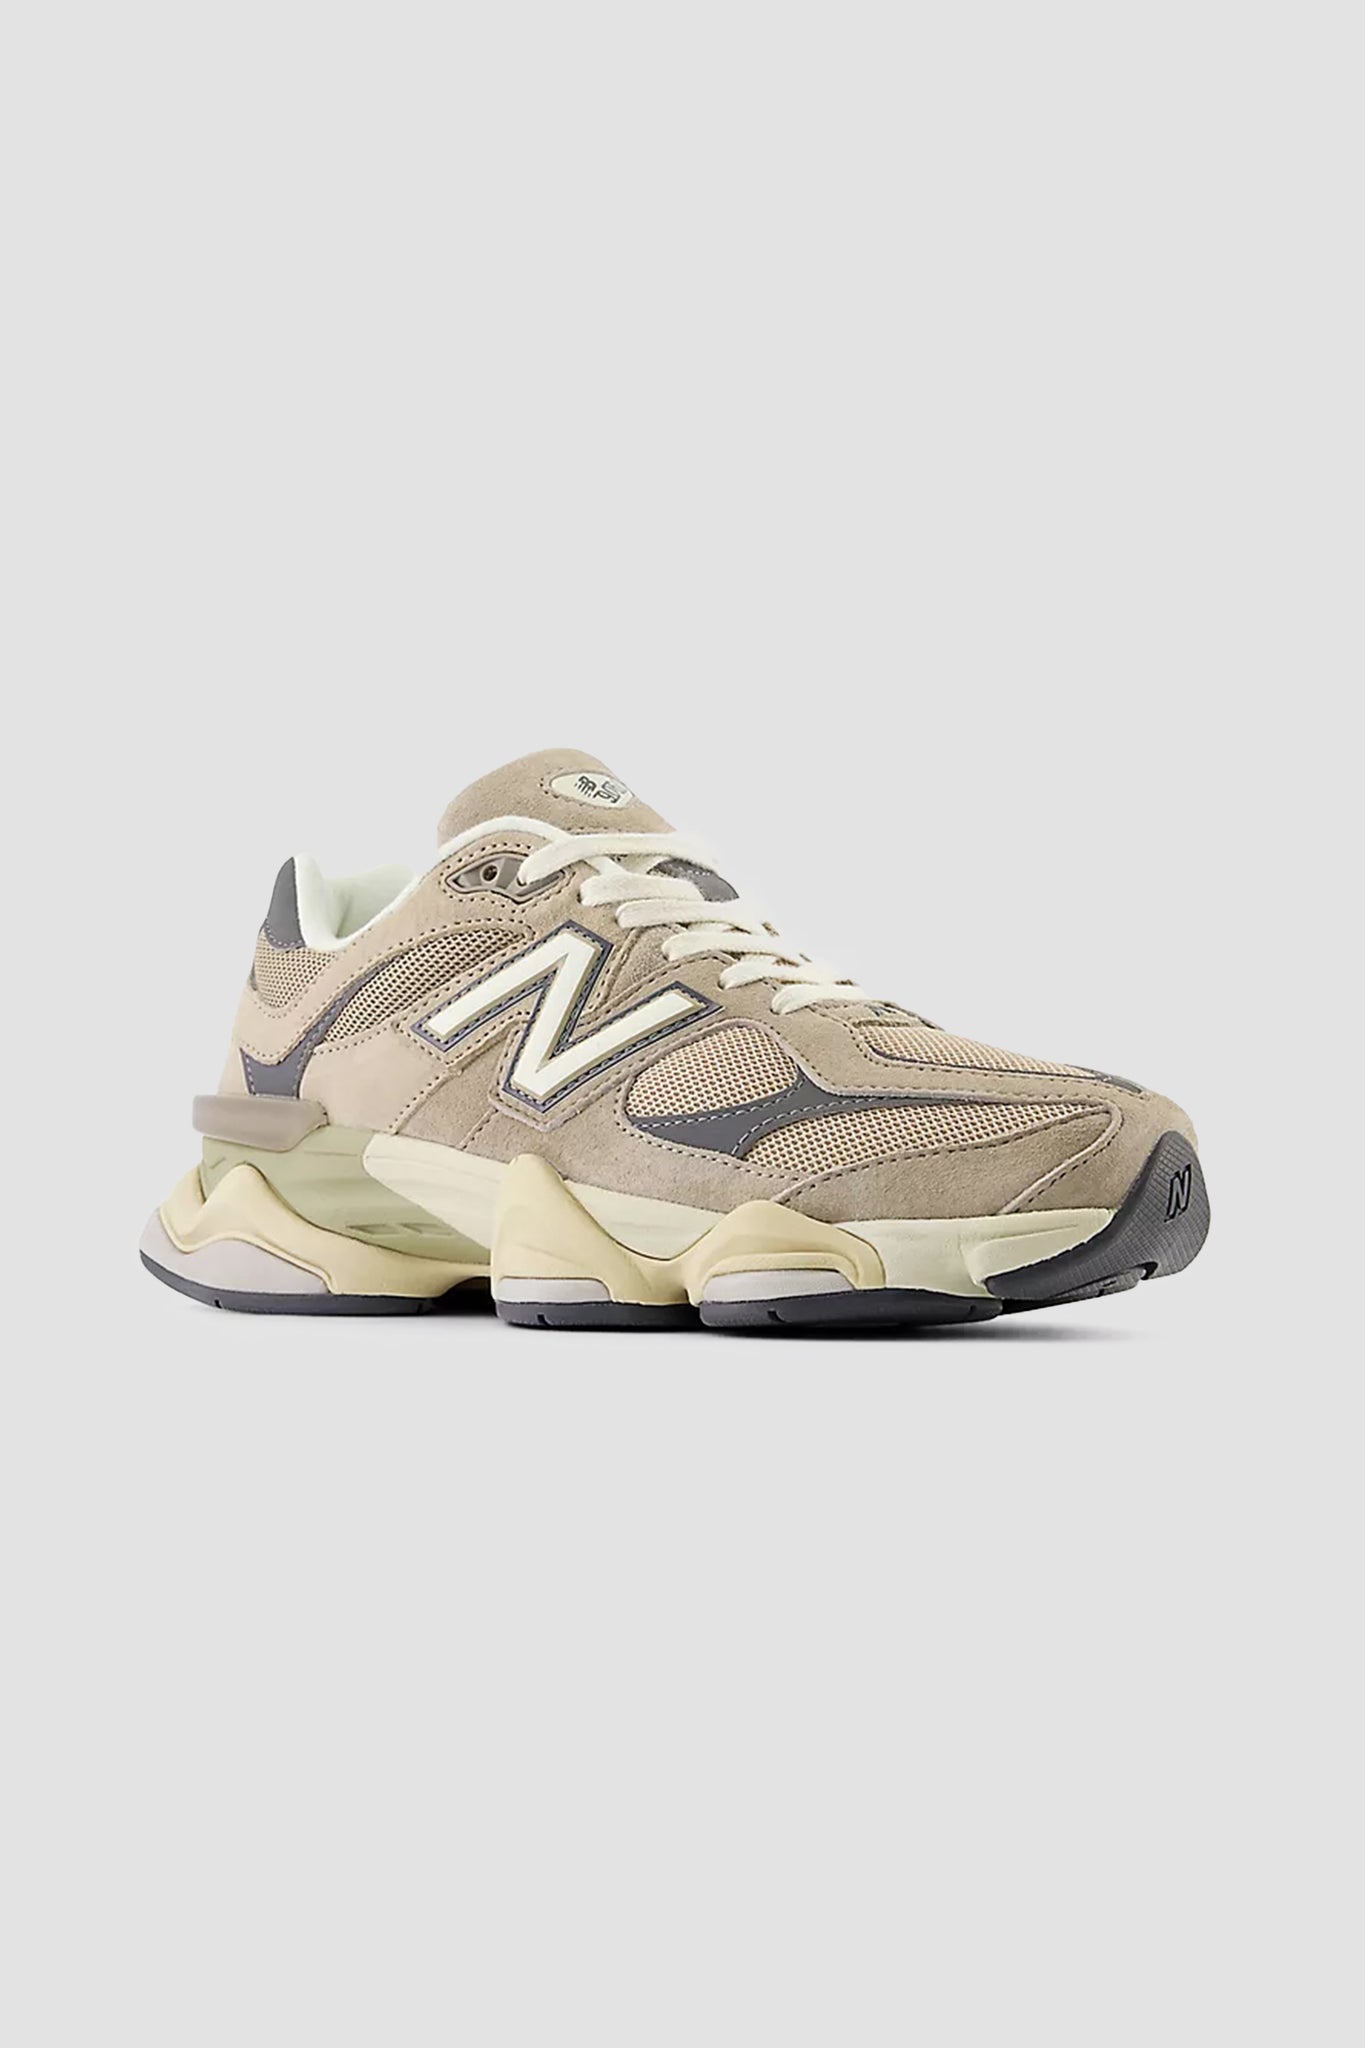 New Balance Unisex 9060 Sneaker in Driftwood with Mindful Grey and Castlerock